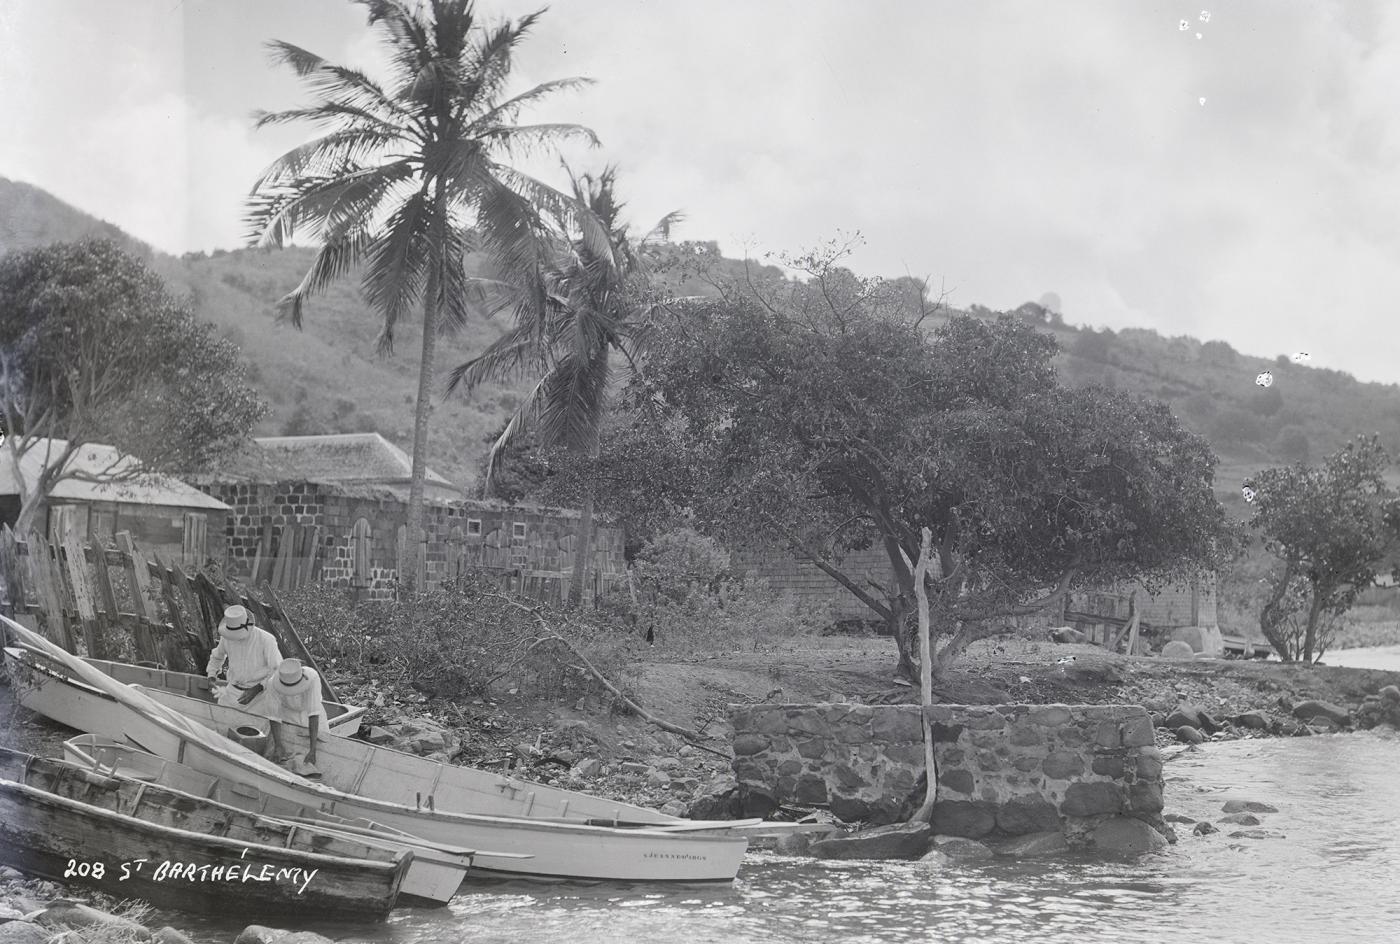 An image showing 'Saint Barthelemy, West Indies'